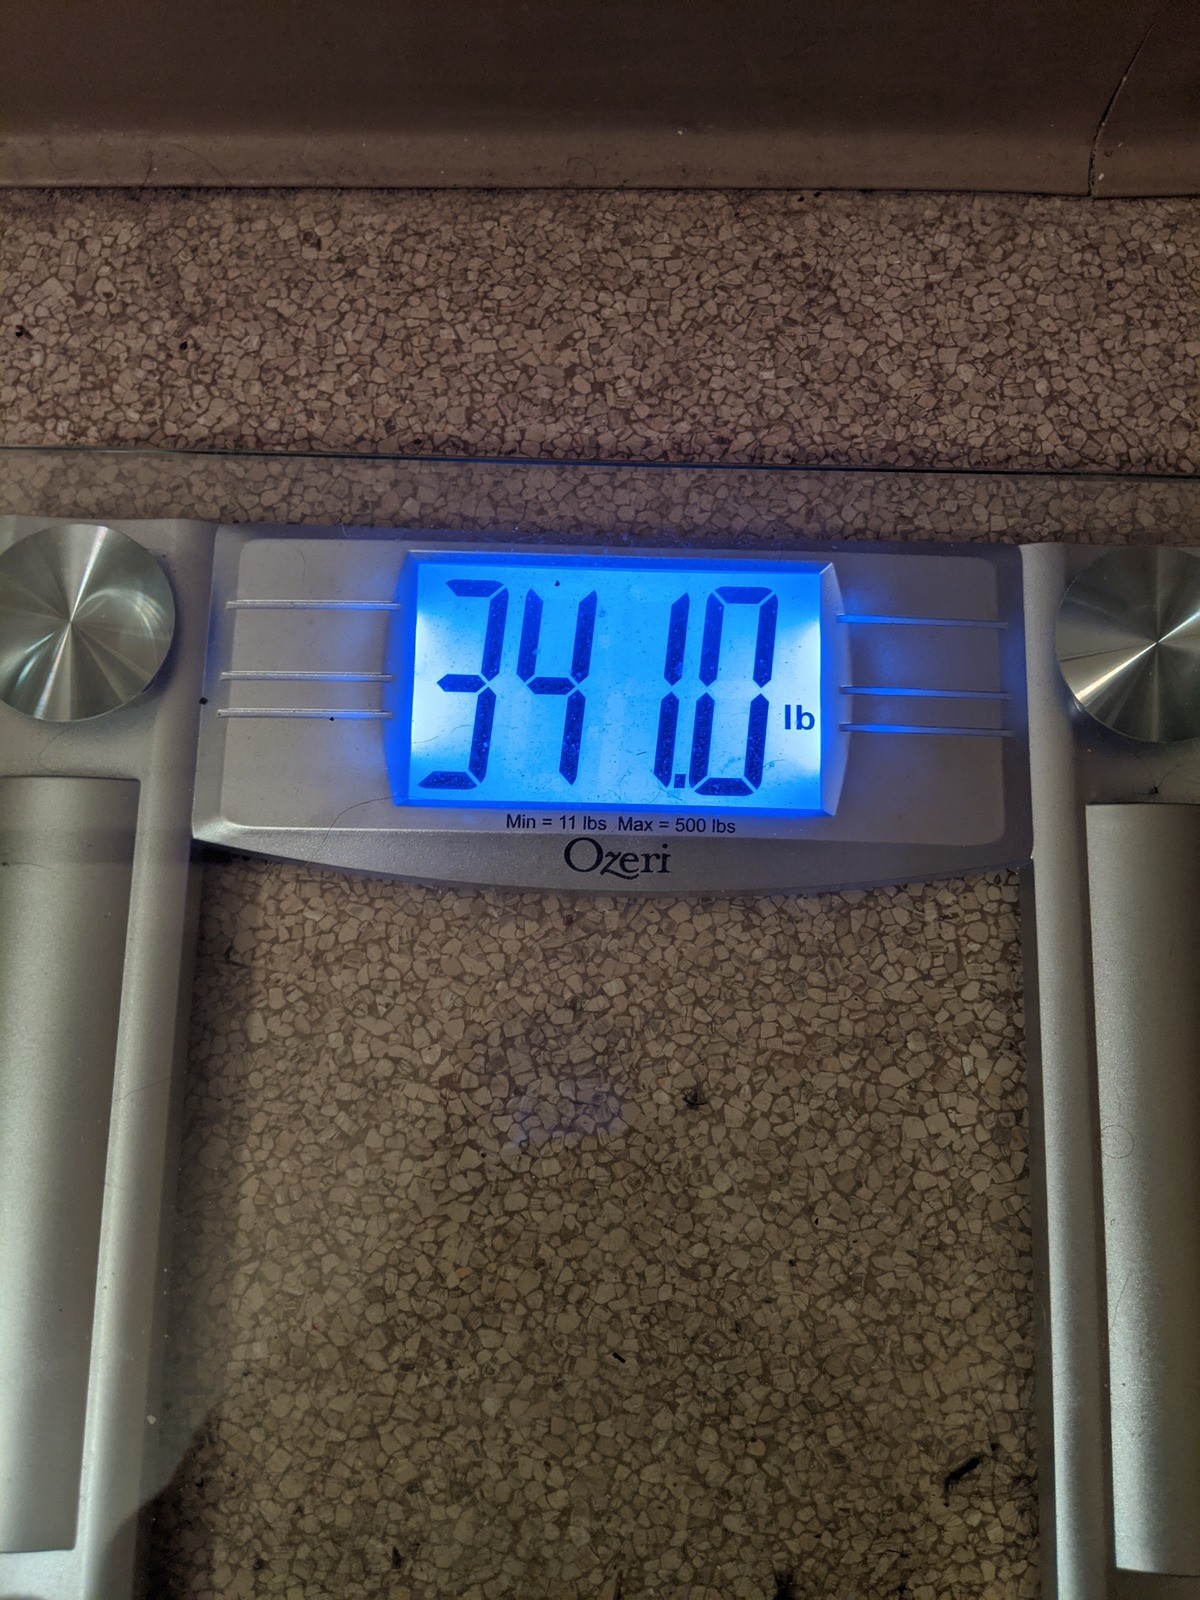 December 2019 weight loss progress report. join list: WeightlossProgress (169 subs)Mention History For being the holiday season, I dropped quite a bit of weight